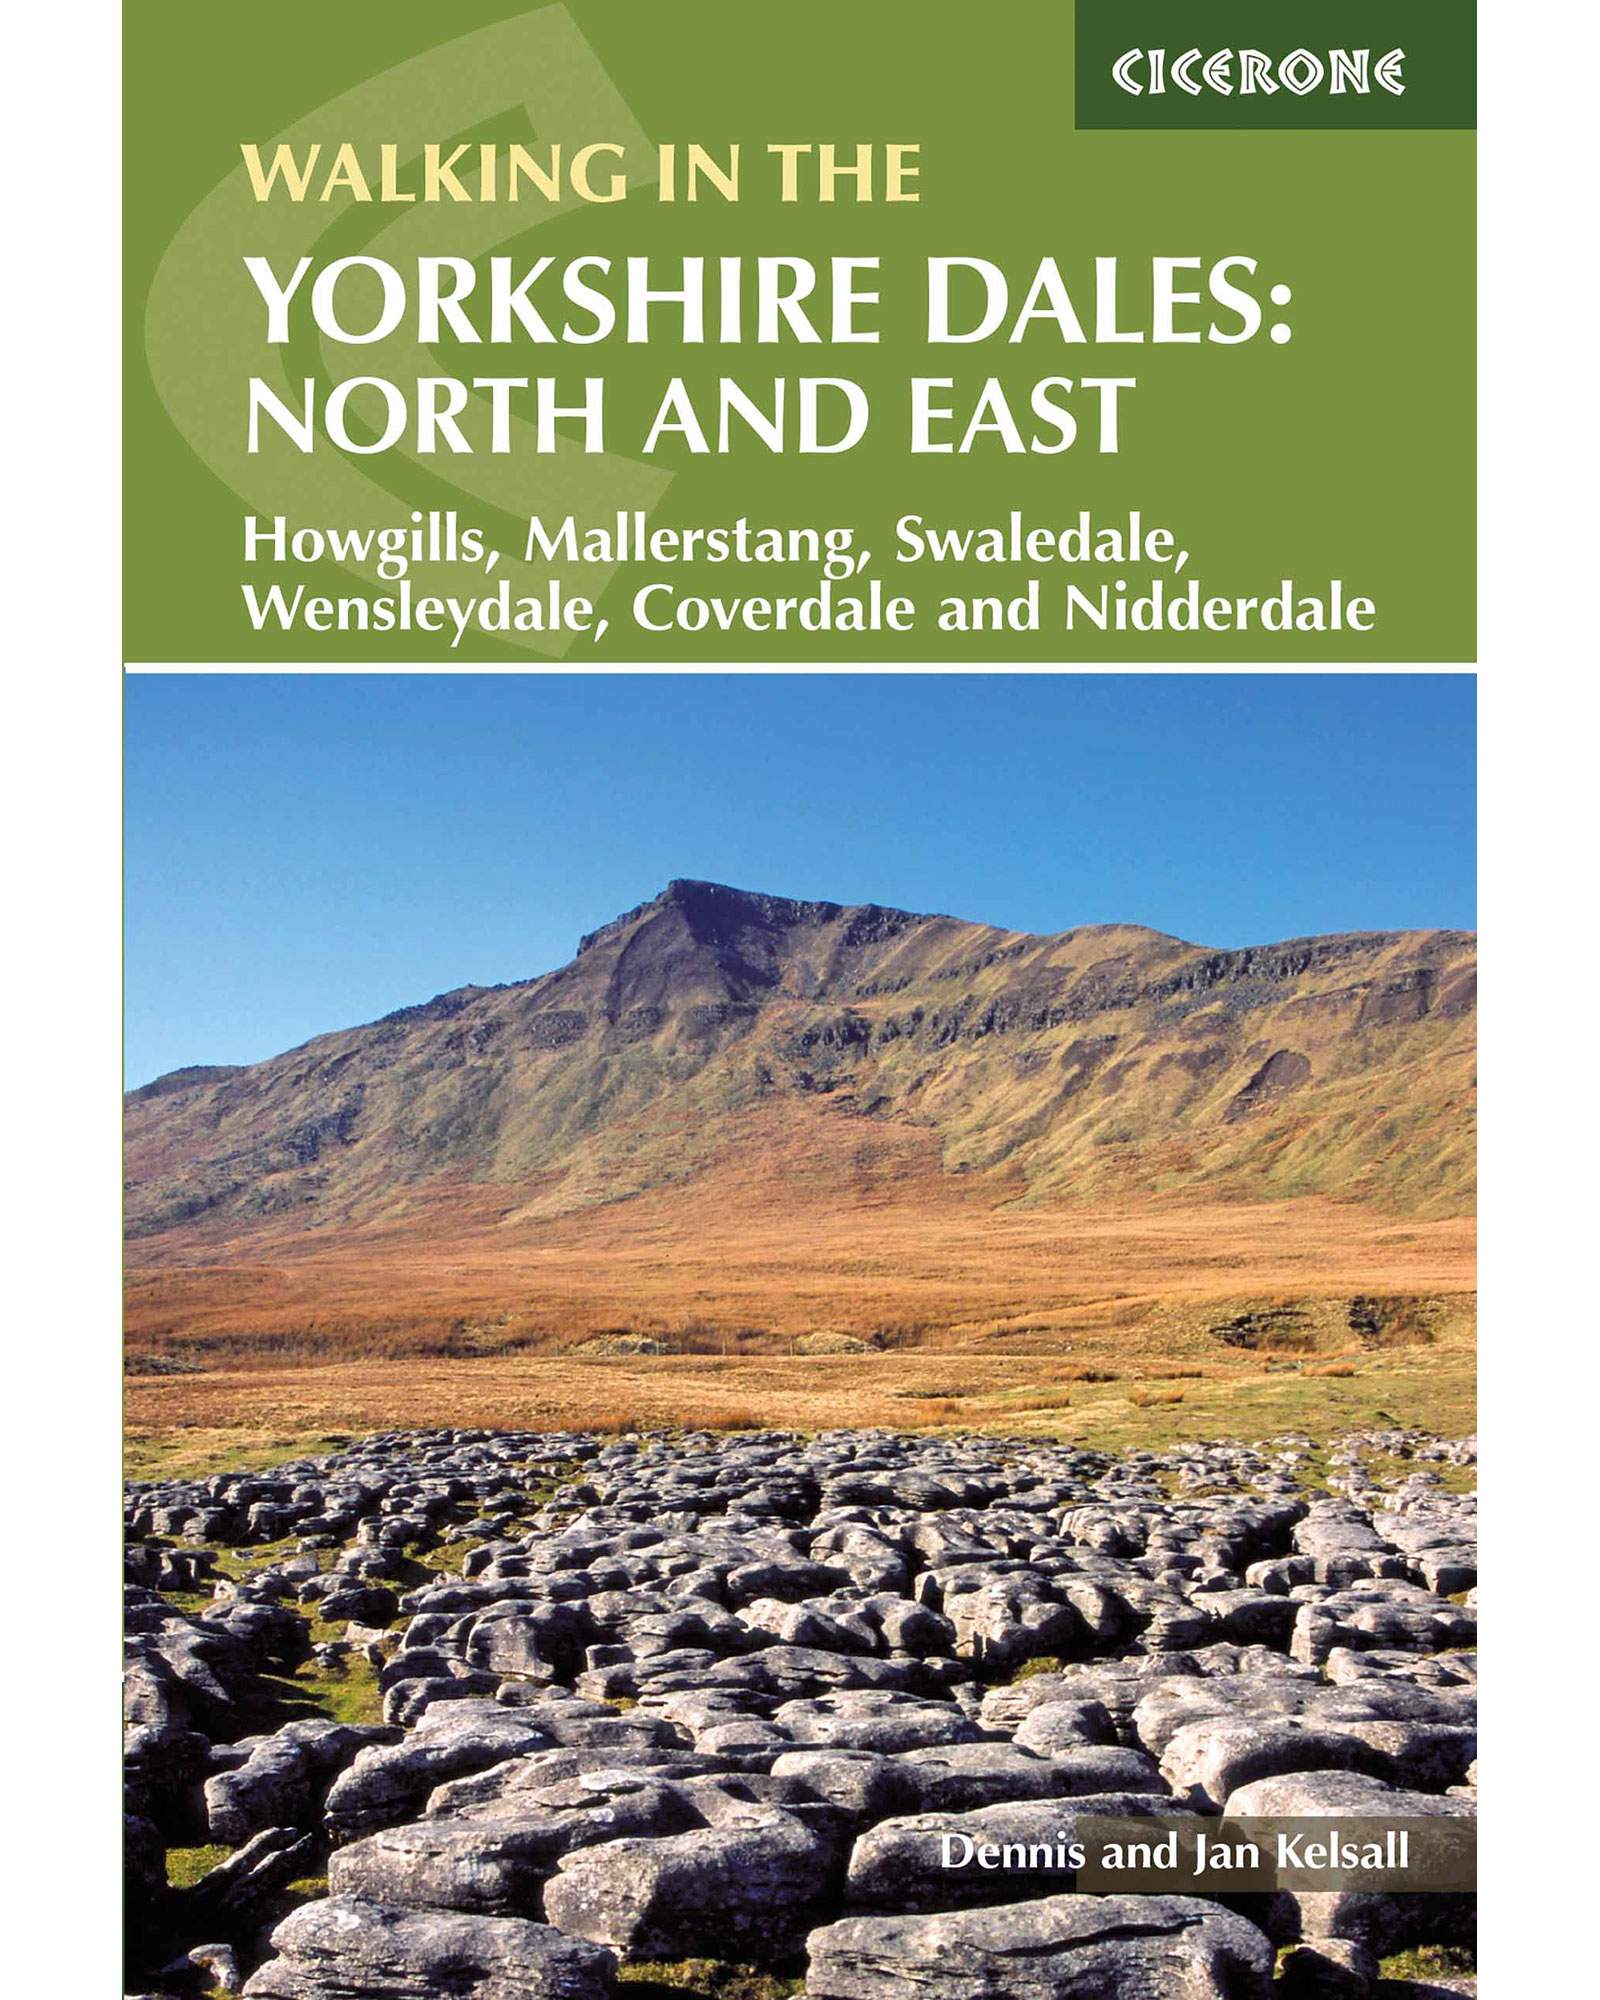 Cicerone Walking In The Yorkshire Dales: North And East Guide Book